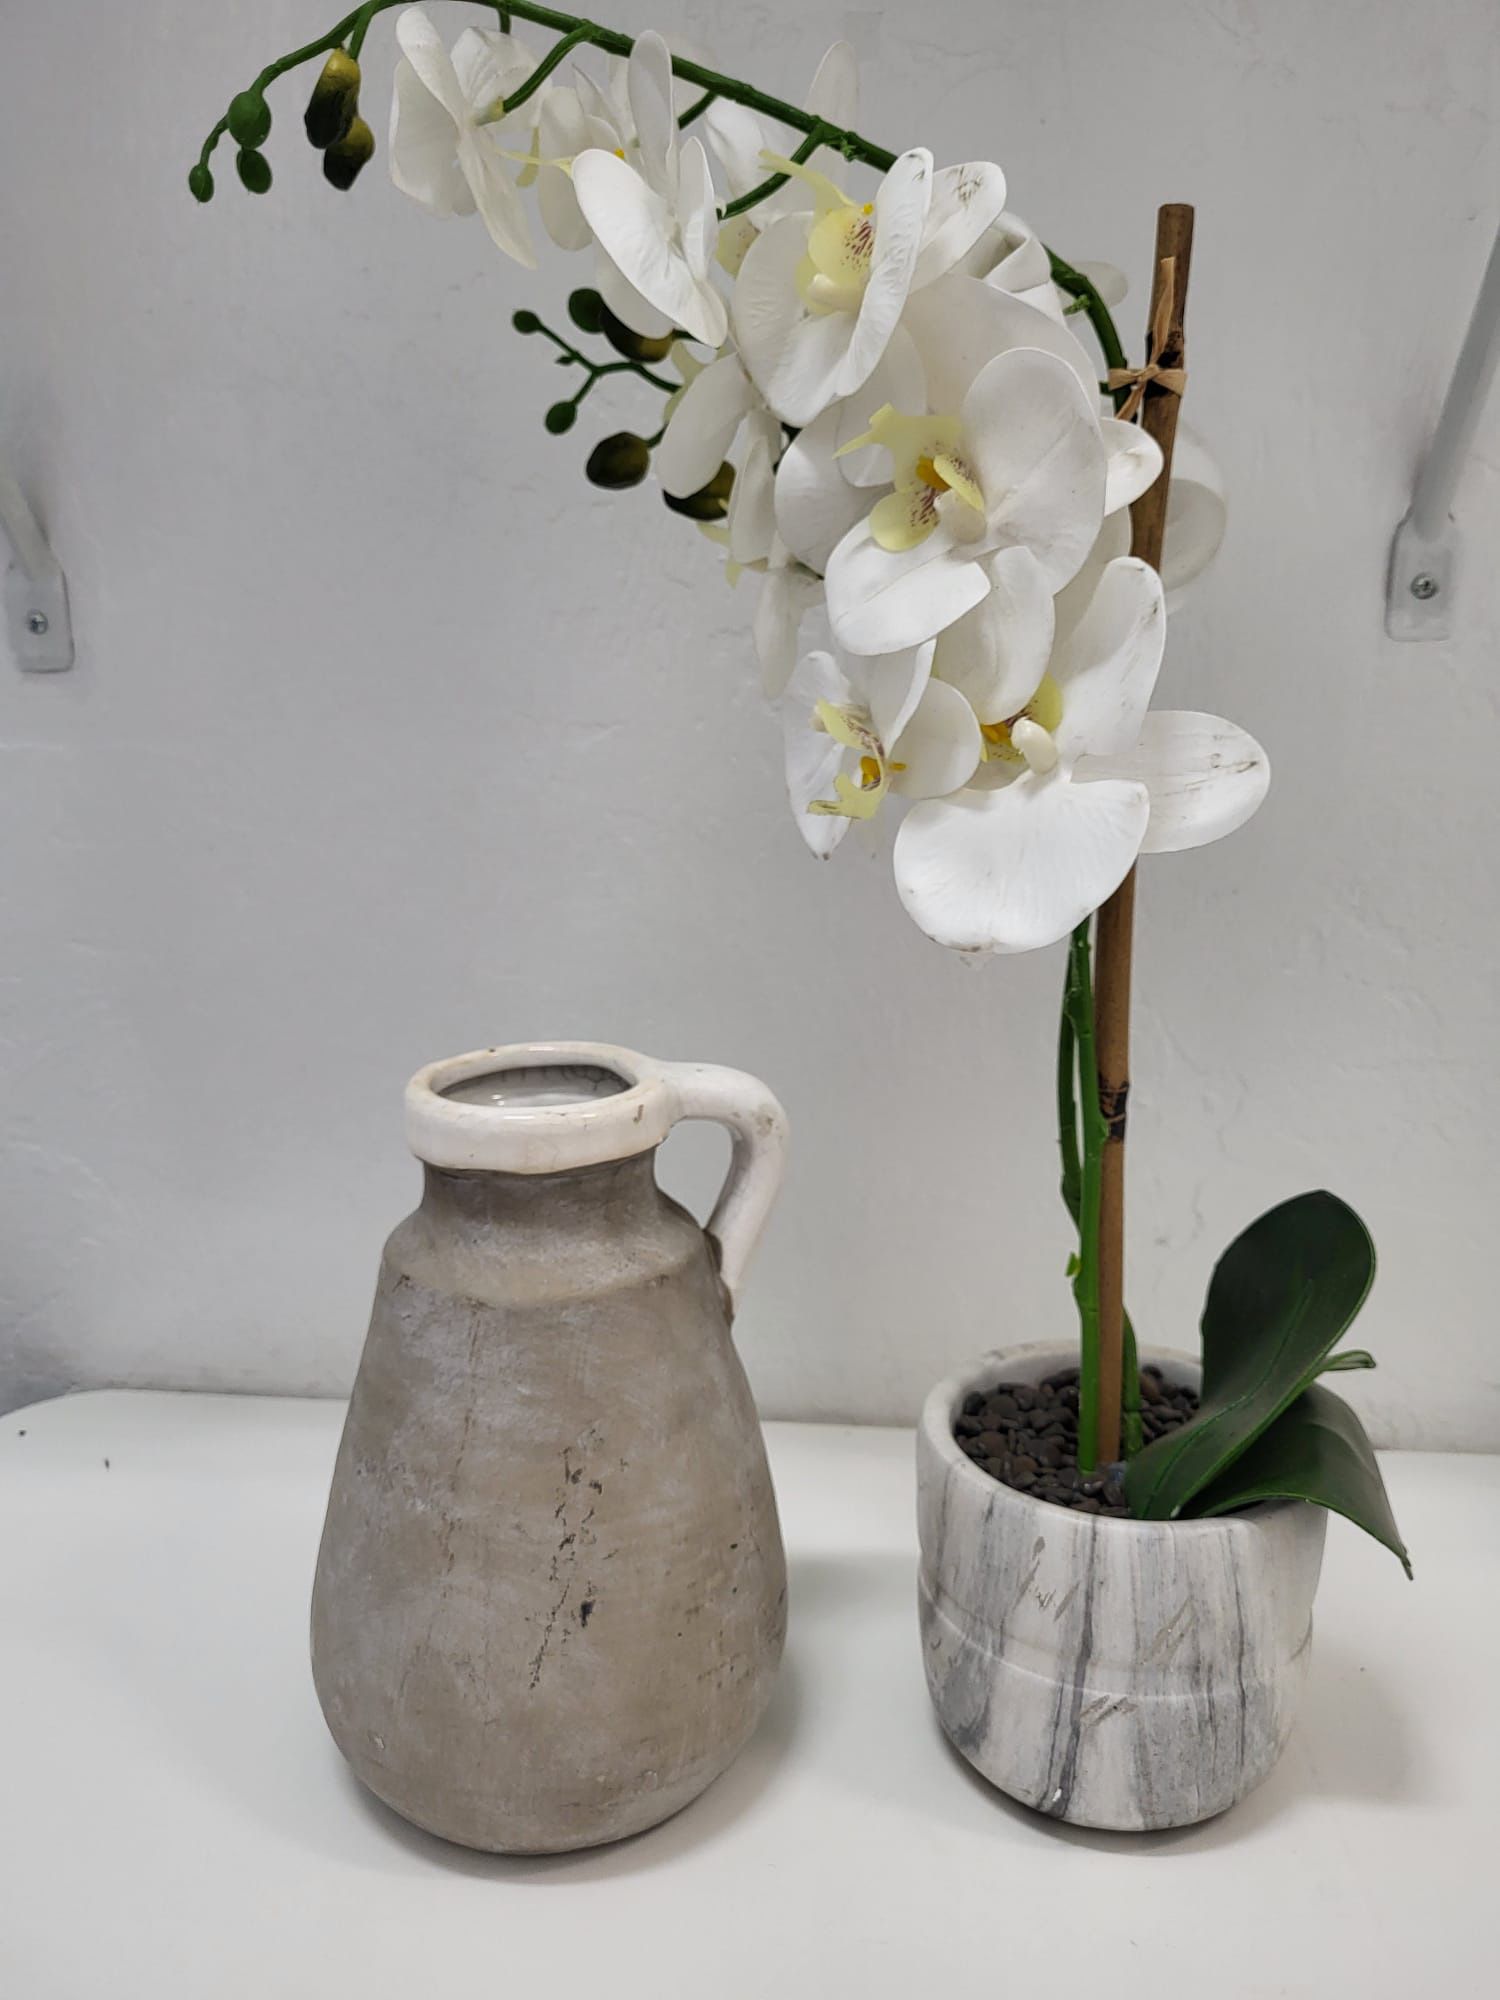 Orchid, Ceramic Vase, Wall Flowers Vase And Little Garden